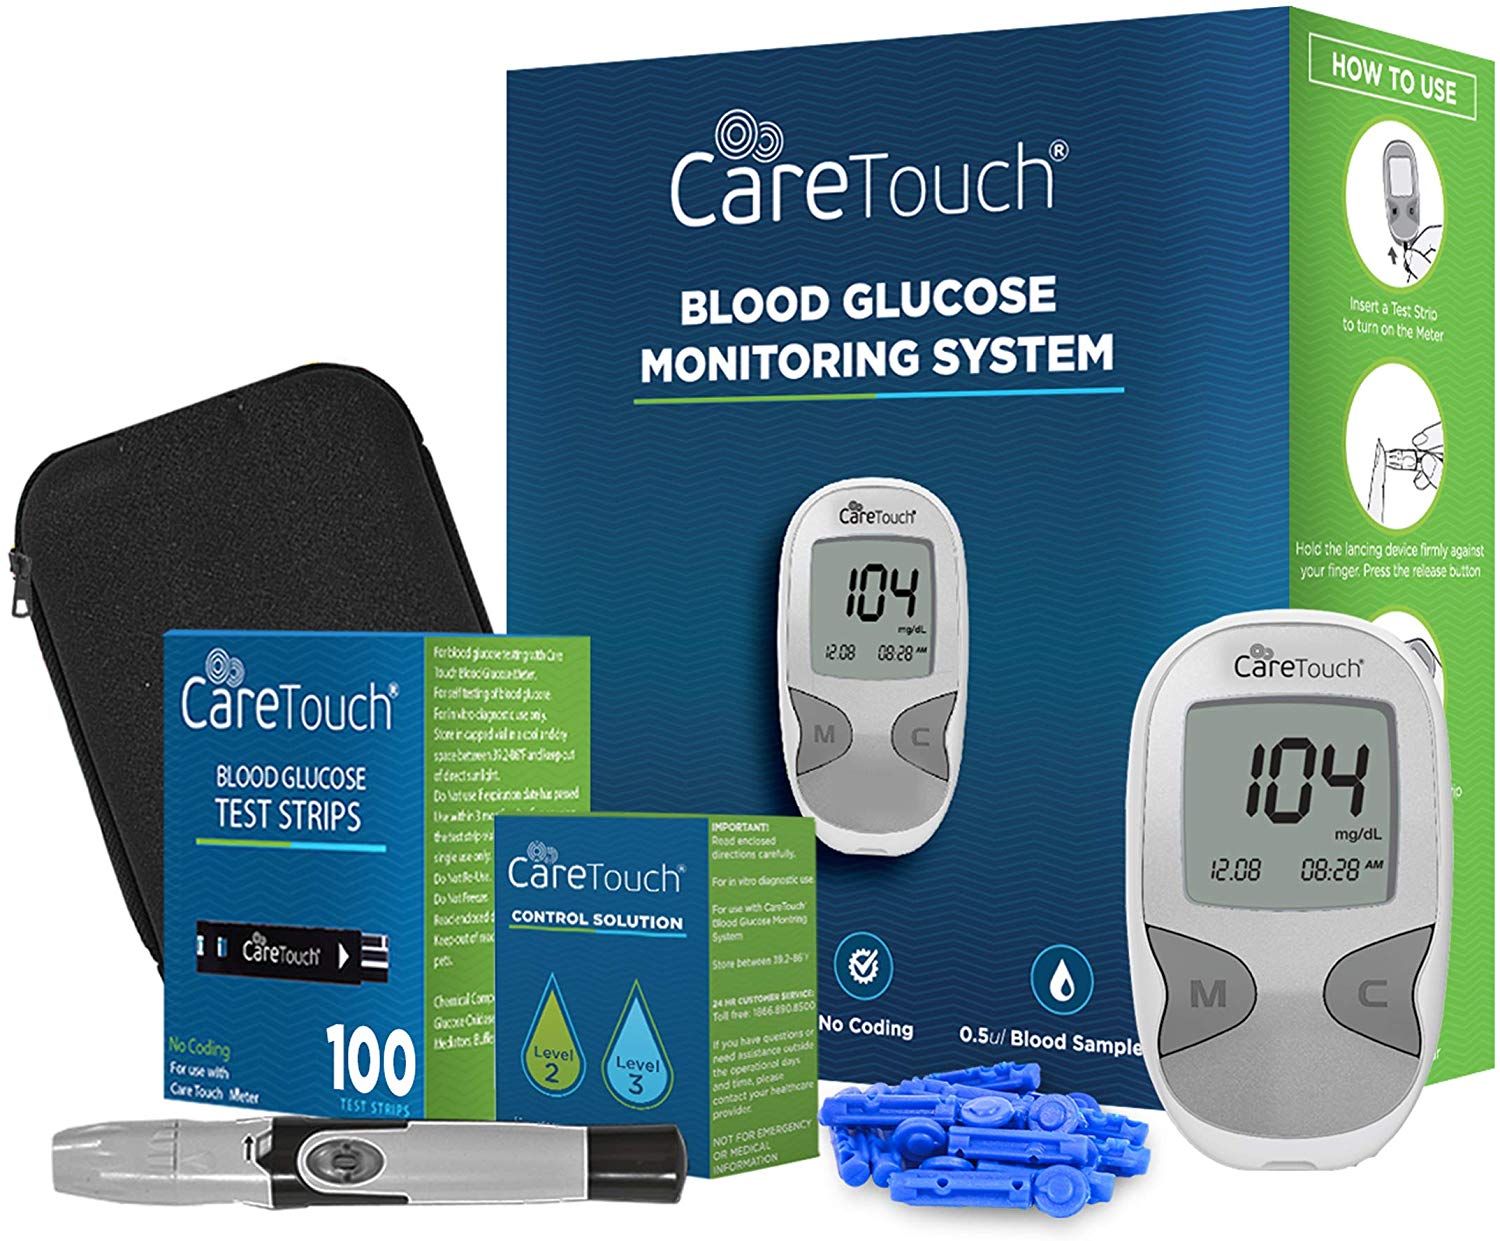 10 Best Glucose Meter With Cheapest Strips